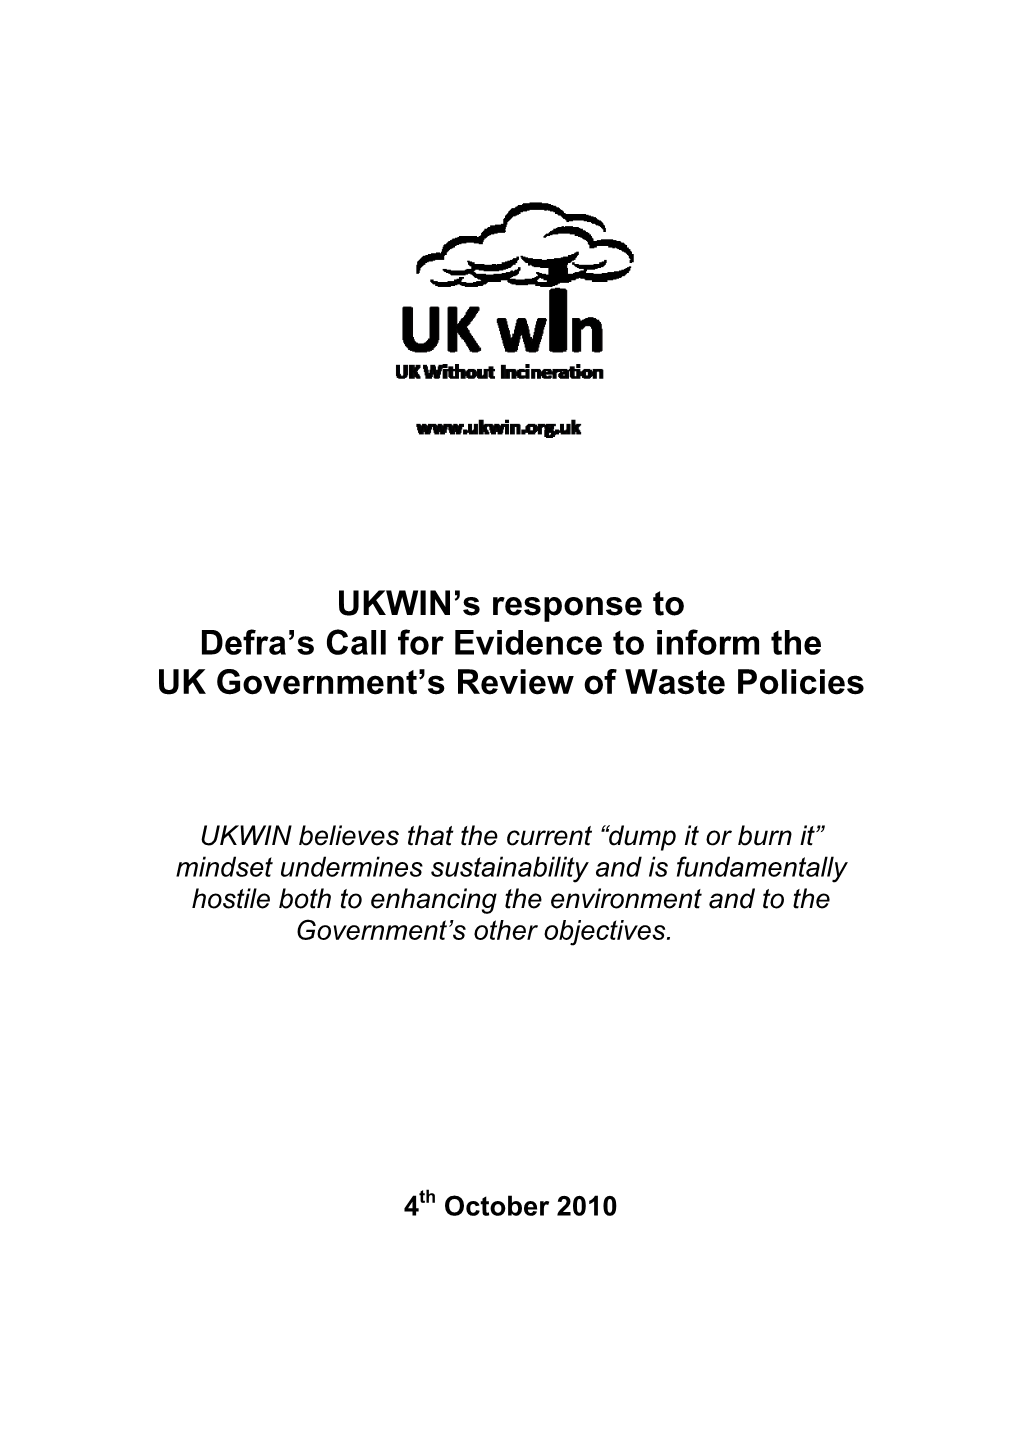 UKWIN's Response to Defra's Call for Evidence to Inform the UK